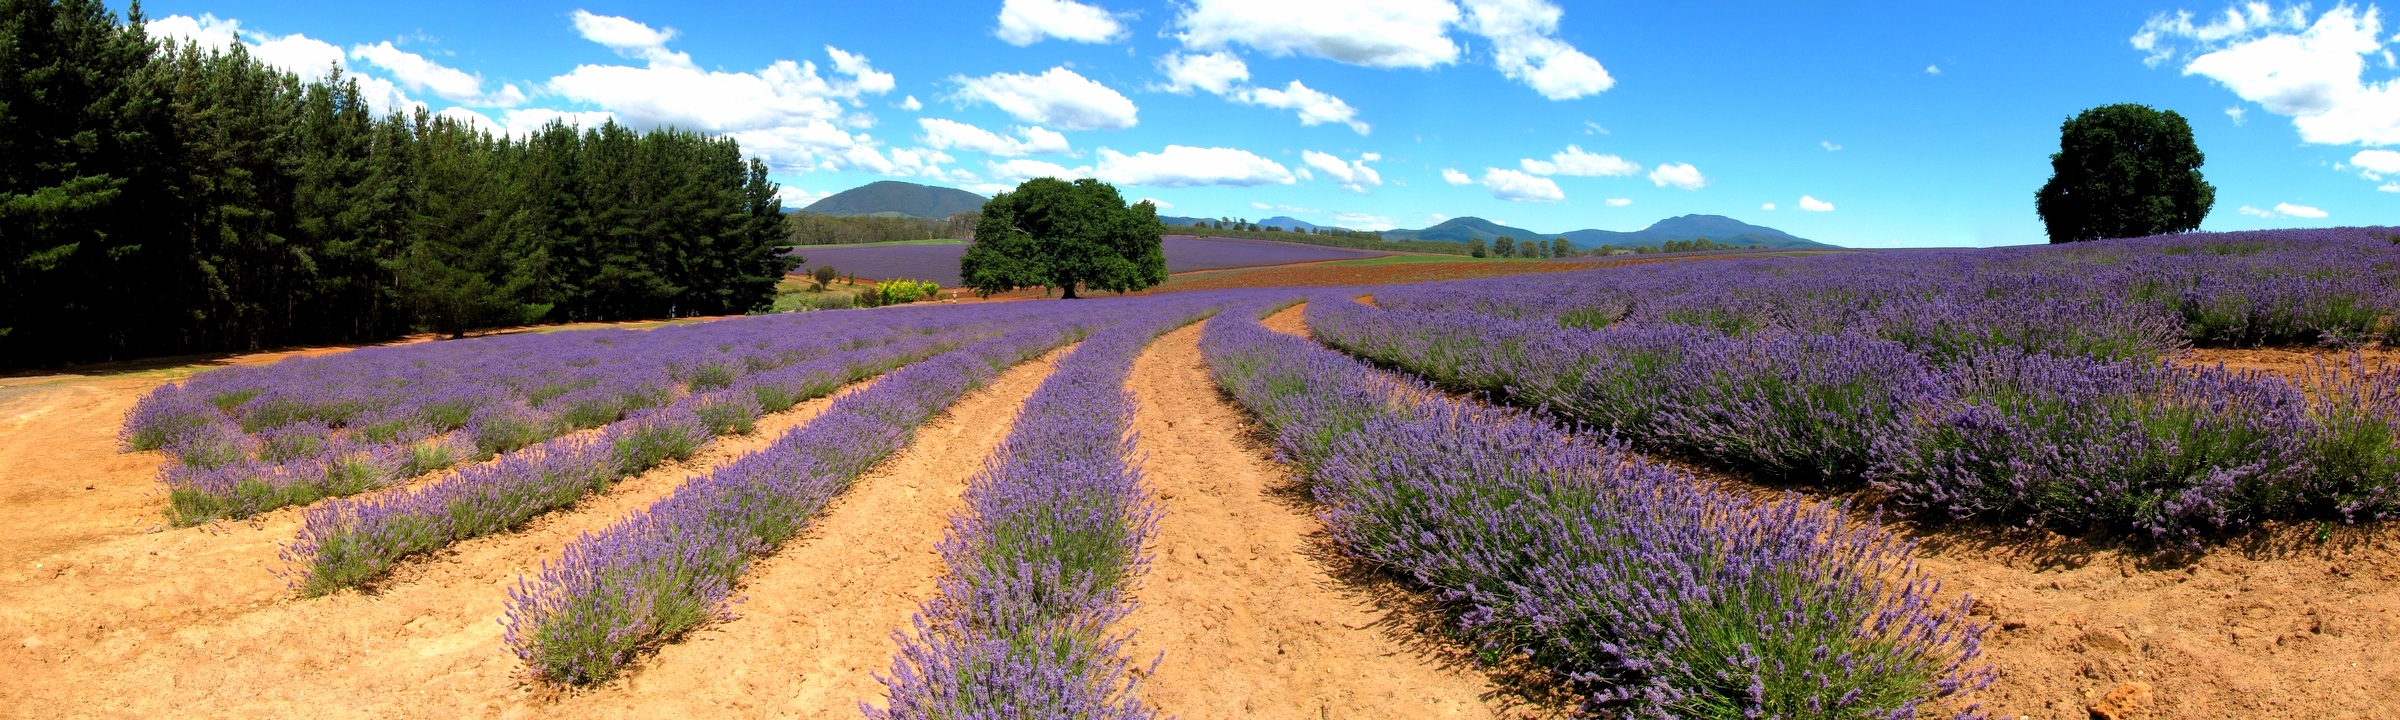 a field with rows of lavender plants and mountains in the distance